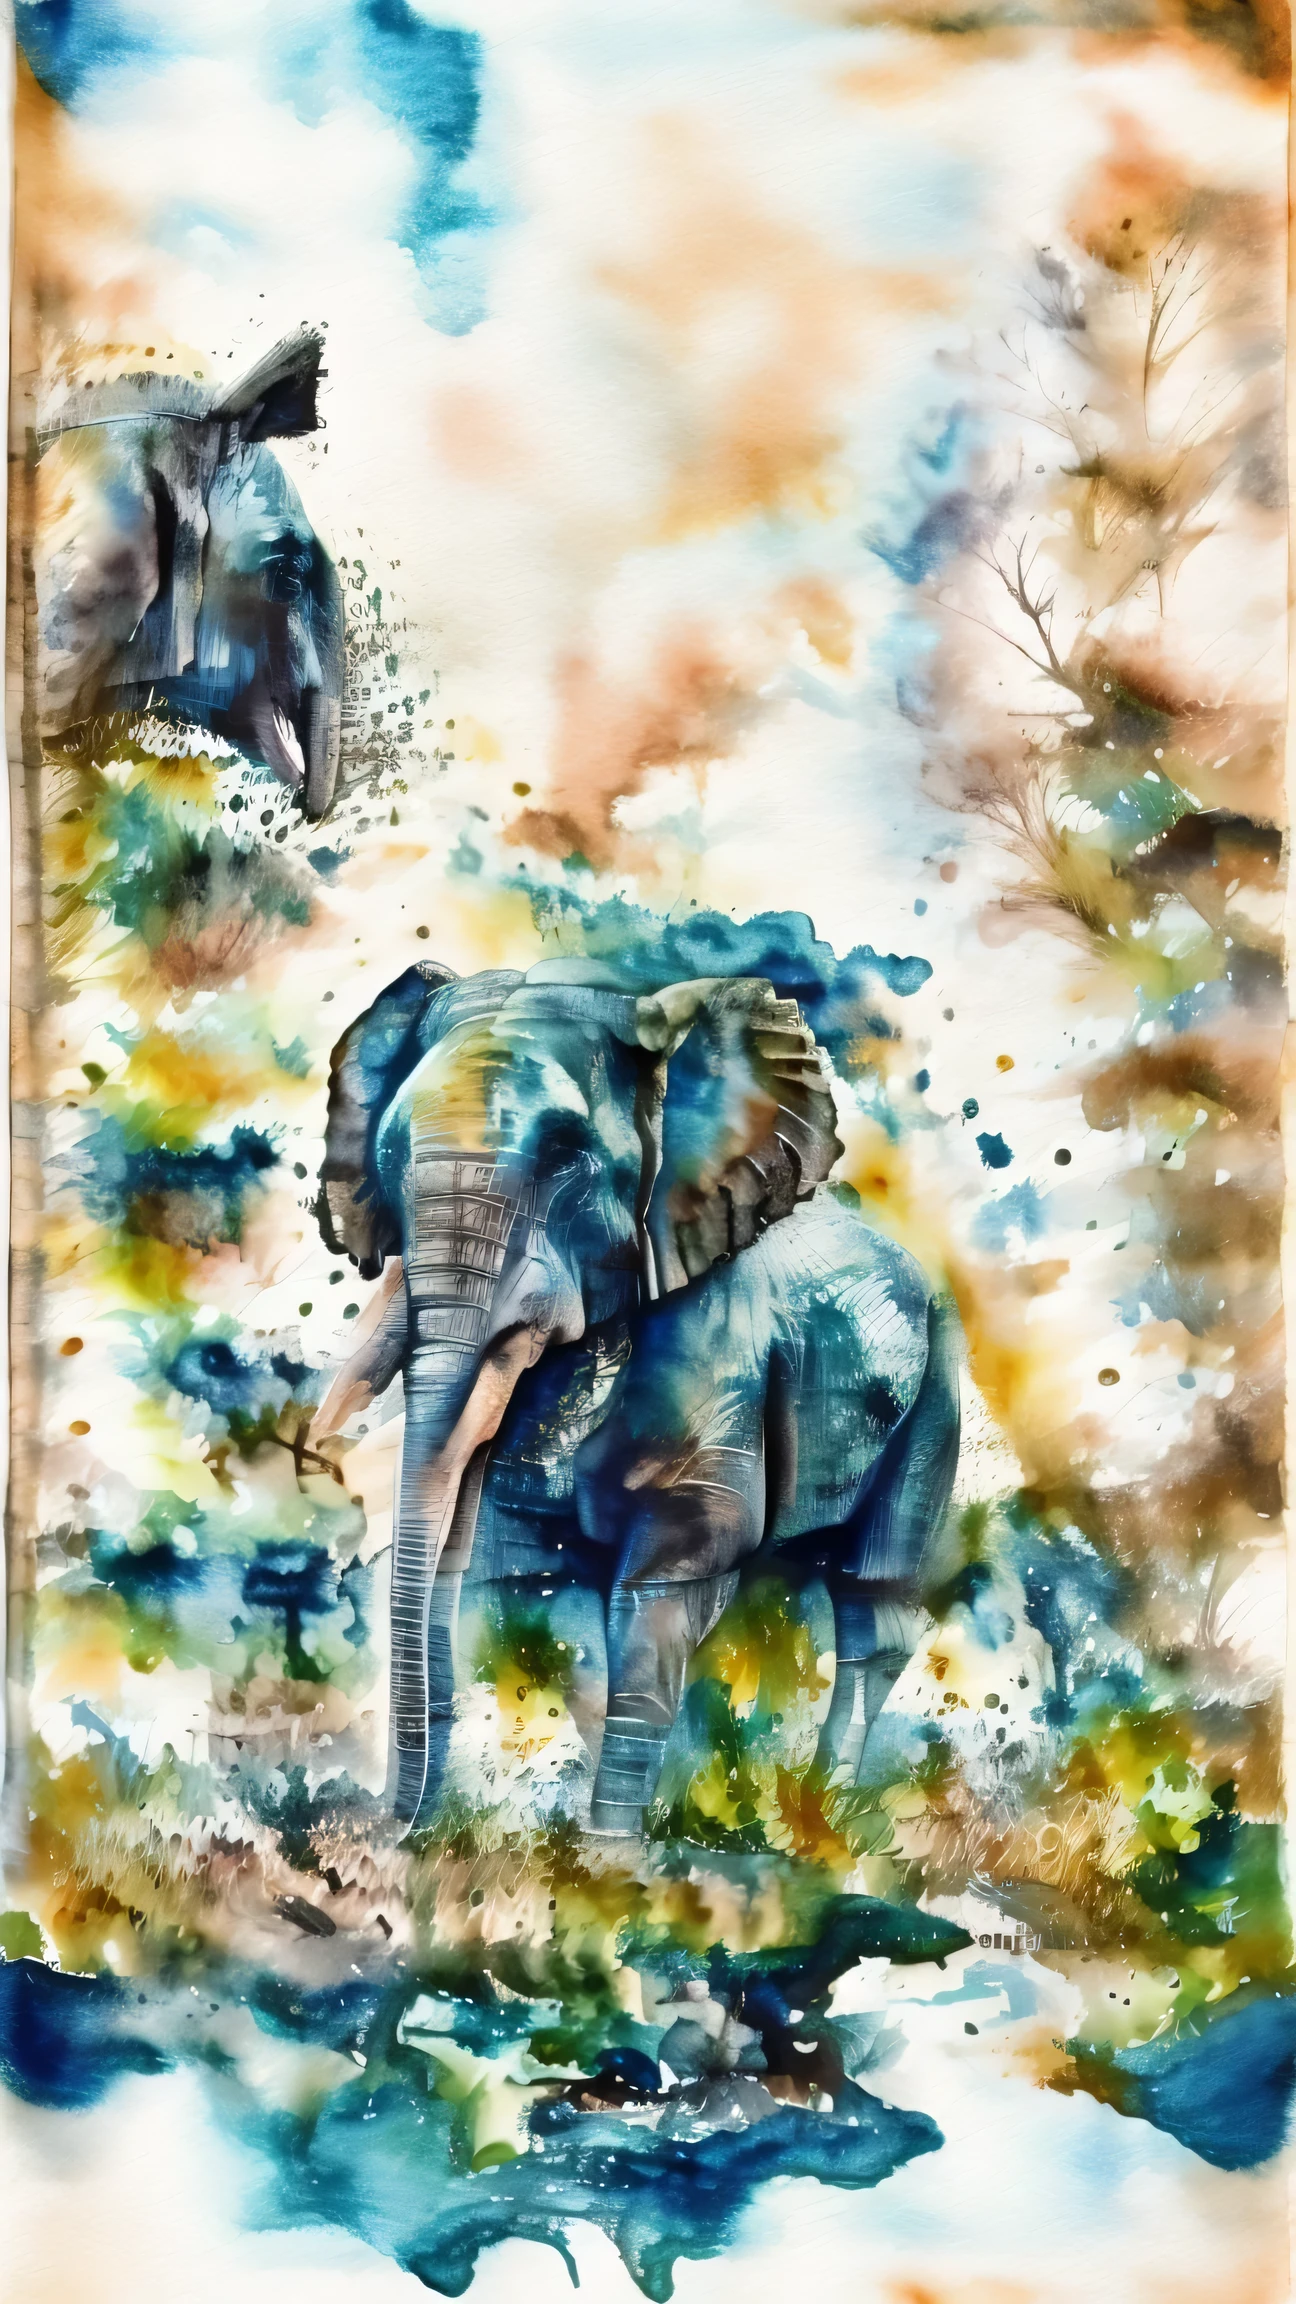 Africa, elephant walking in a river, surrounded by trees and grass, wildlife scene, natural habitat, nature, animal,water, realistic, sky, scenery, grass, forest, animal_focus, modern art, painting, drawing, watercolor, psychedelic colors